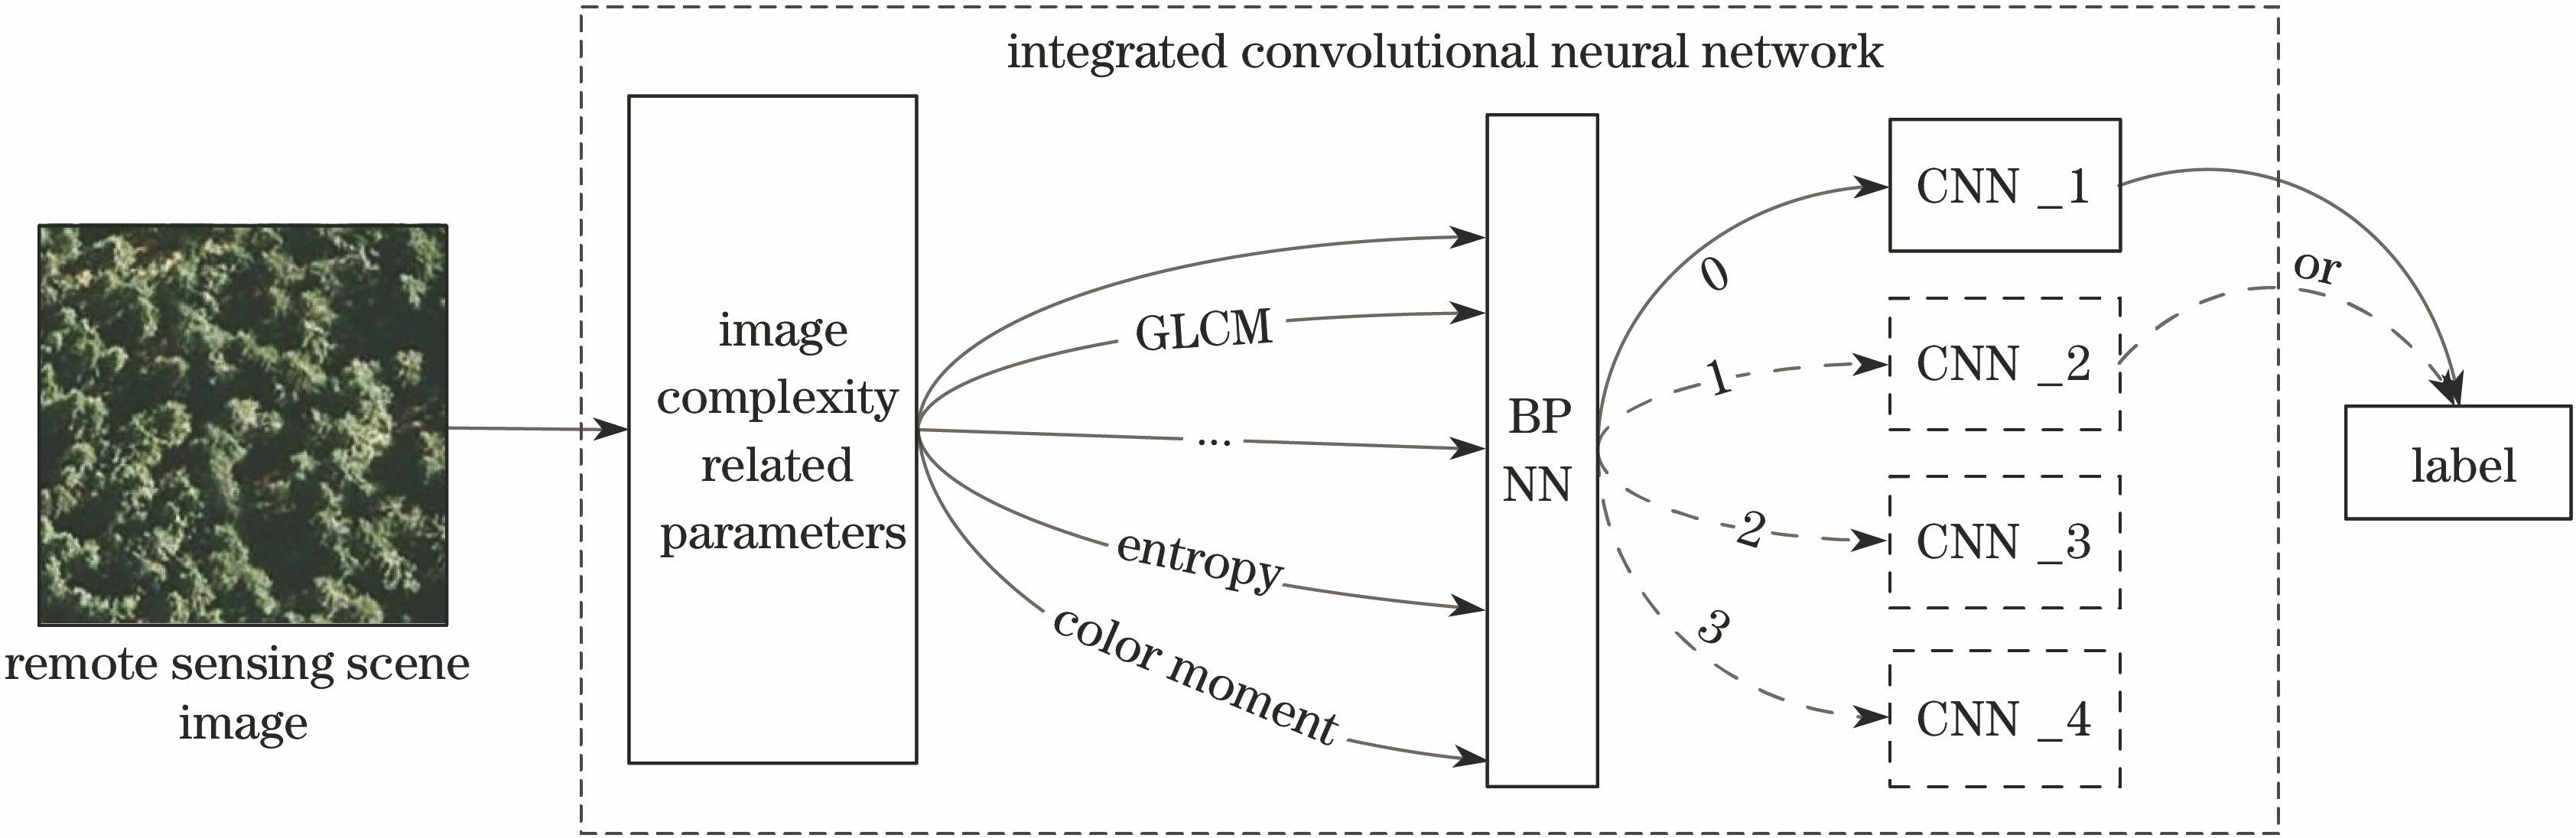 Architecture of integrated neural network